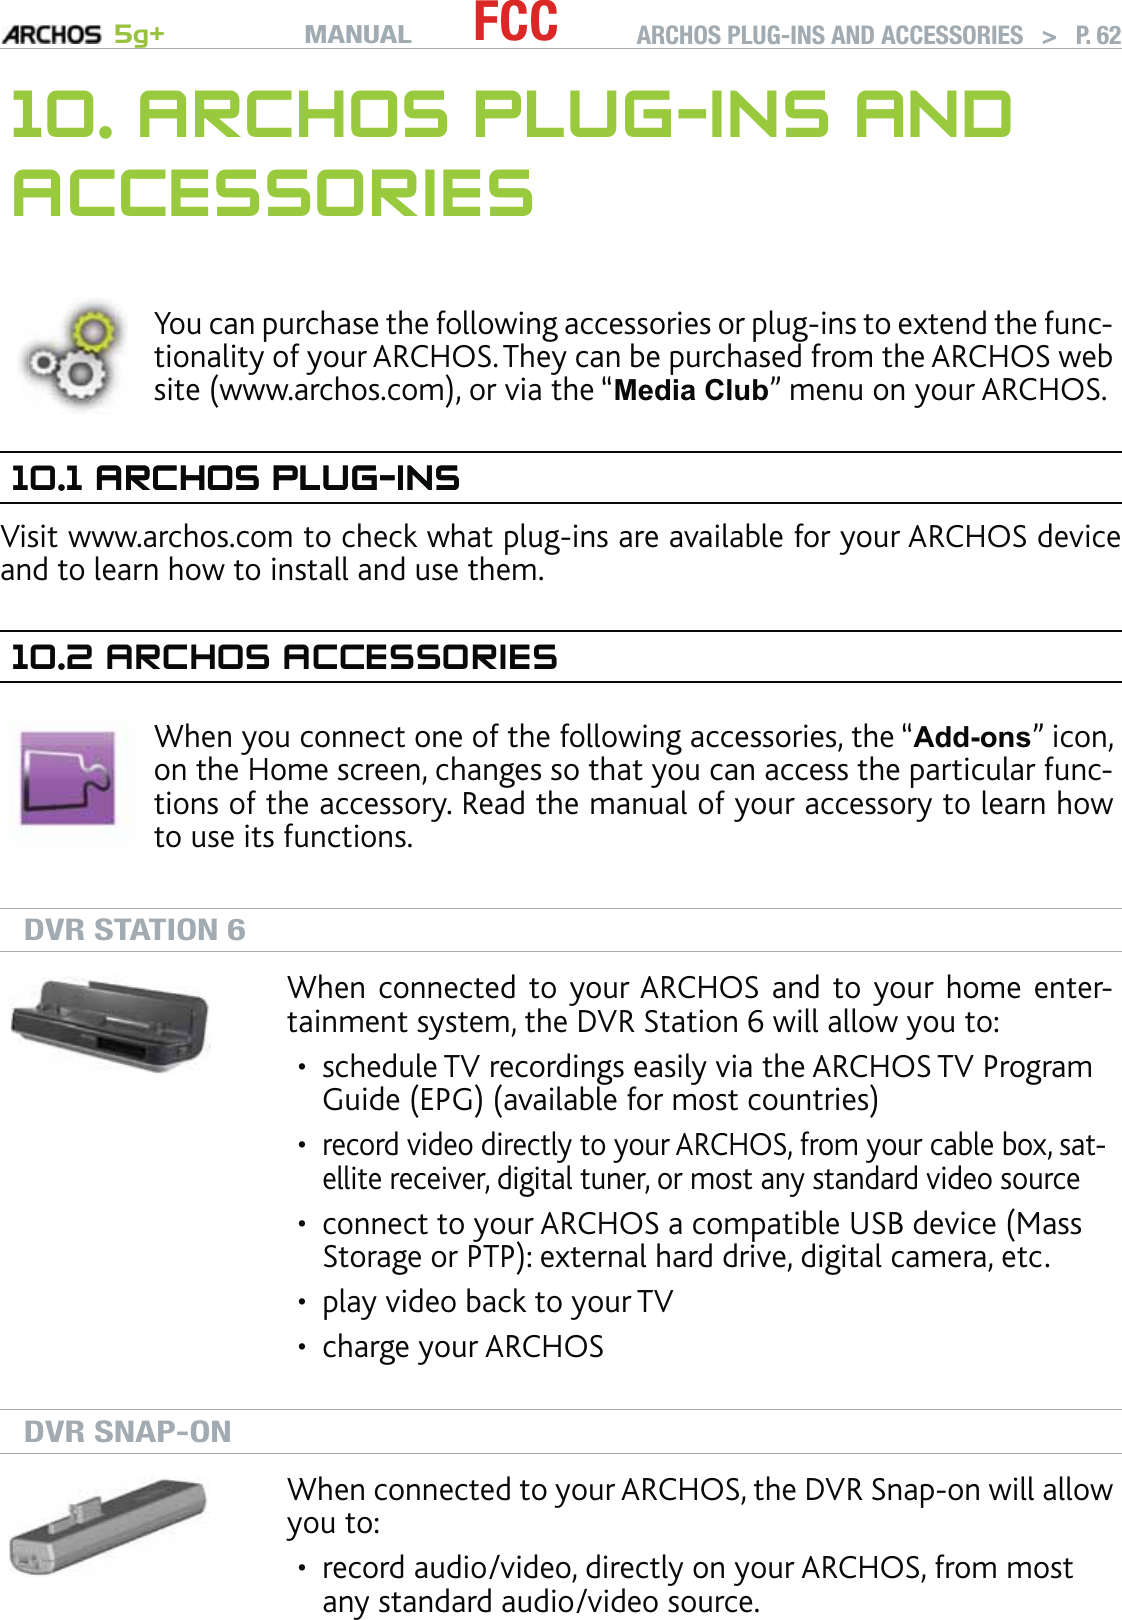 MANUAL 5g+ FCC ARCHOS PLUG-INS AND ACCESSORIES   &gt;   P. 6210. ARCHOS PLUG-INS AND ACCESSORIESYou can purchase the following accessories or plug-ins to extend the func-tionality of your ARCHOS. They can be purchased from the ARCHOS web site (www.archos.com), or via the “Media Club” menu on your ARCHOS.10.1 ARCHOS PLUG-INSARCHOS PLUG-INSVisit www.archos.com to check what plug-ins are available for your ARCHOS device and to learn how to install and use them.10.2 ARCHOS ACCESSORIESWhen you connect one of the following accessories, the “Add-ons” icon, on the Home screen, changes so that you can access the particular func-tions of the accessory. Read the manual of your accessory to learn how to use its functions.DVR STATION 6When connected to your ARCHOS and to your home enter-tainment system, the DVR Station 6 will allow you to:schedule TV recordings easily via the ARCHOS TV Program Guide (EPG) (available for most countries)record video directly to your ARCHOS, from your cable box, sat-ellite receiver, digital tuner, or most any standard video sourceconnect to your ARCHOS a compatible USB device (Mass Storage or PTP): external hard drive, digital camera, etc.play video back to your TVcharge your ARCHOS•••••DVR SNAP-ONWhen connected to your ARCHOS, the DVR Snap-on will allow you to: record audio/video, directly on your ARCHOS, from most any standard audio/video source.•